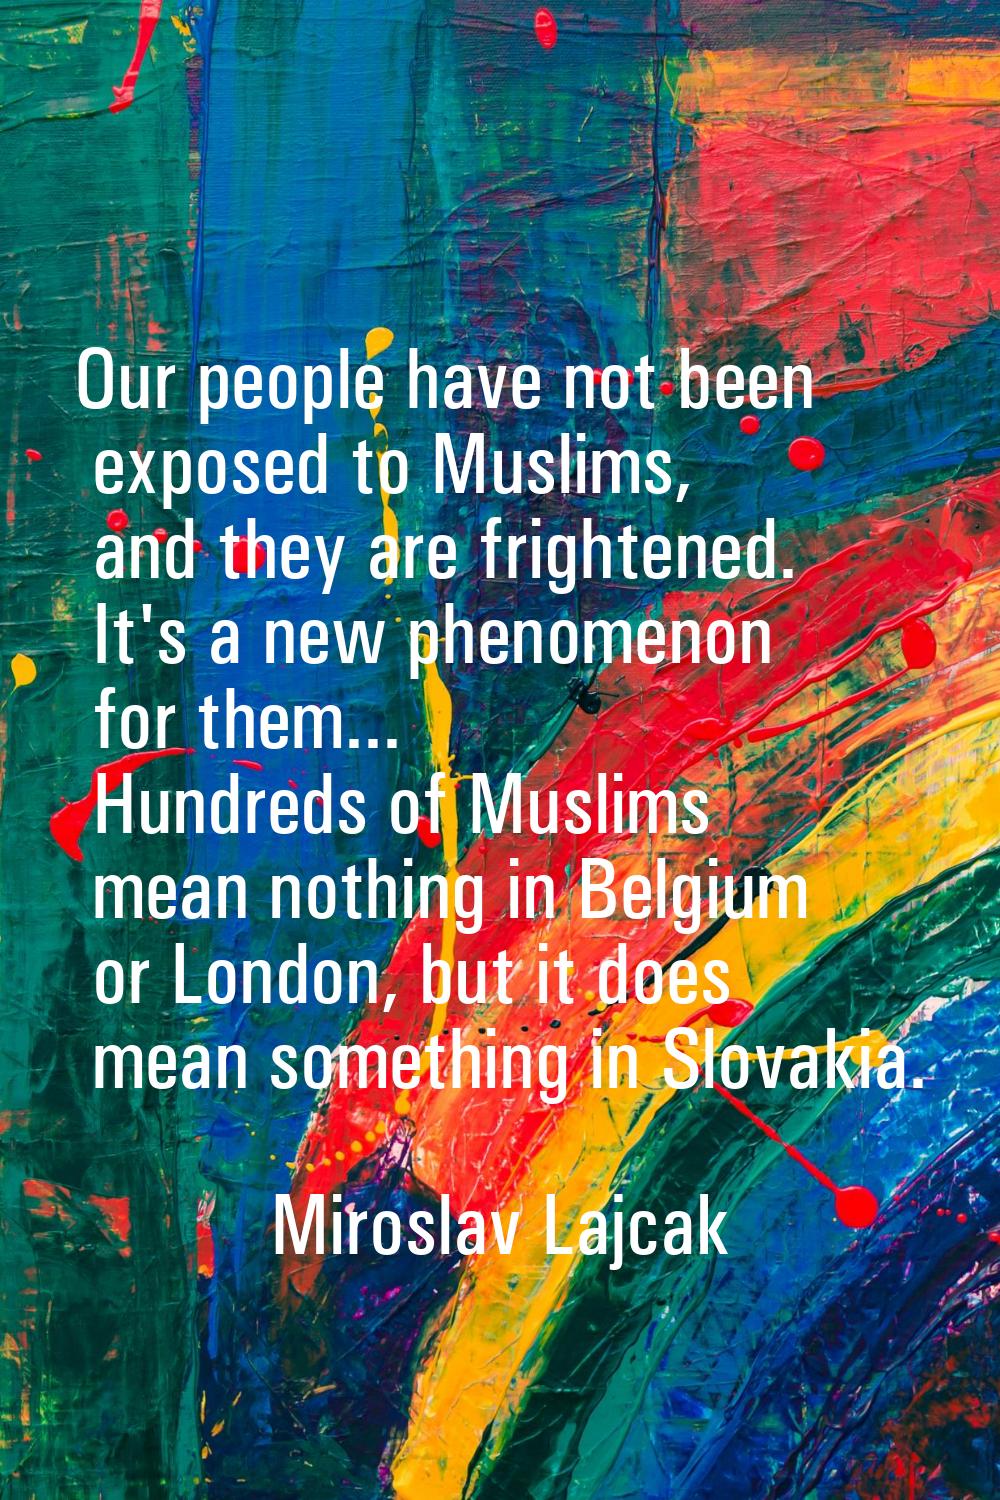 Our people have not been exposed to Muslims, and they are frightened. It's a new phenomenon for the